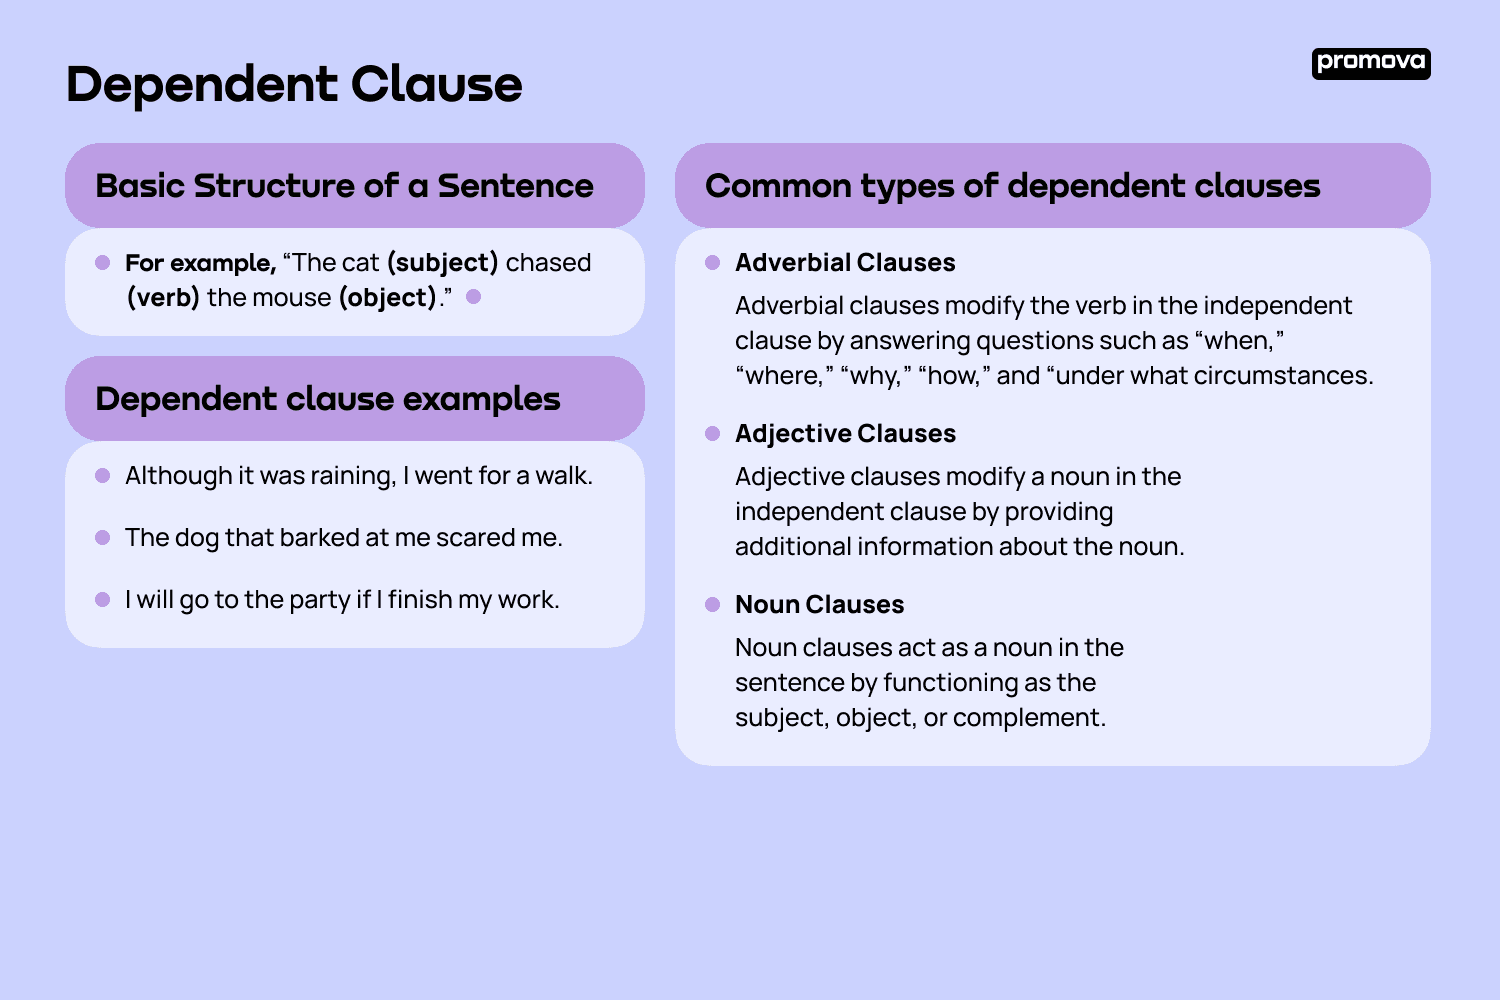 Common types of dependent clauses